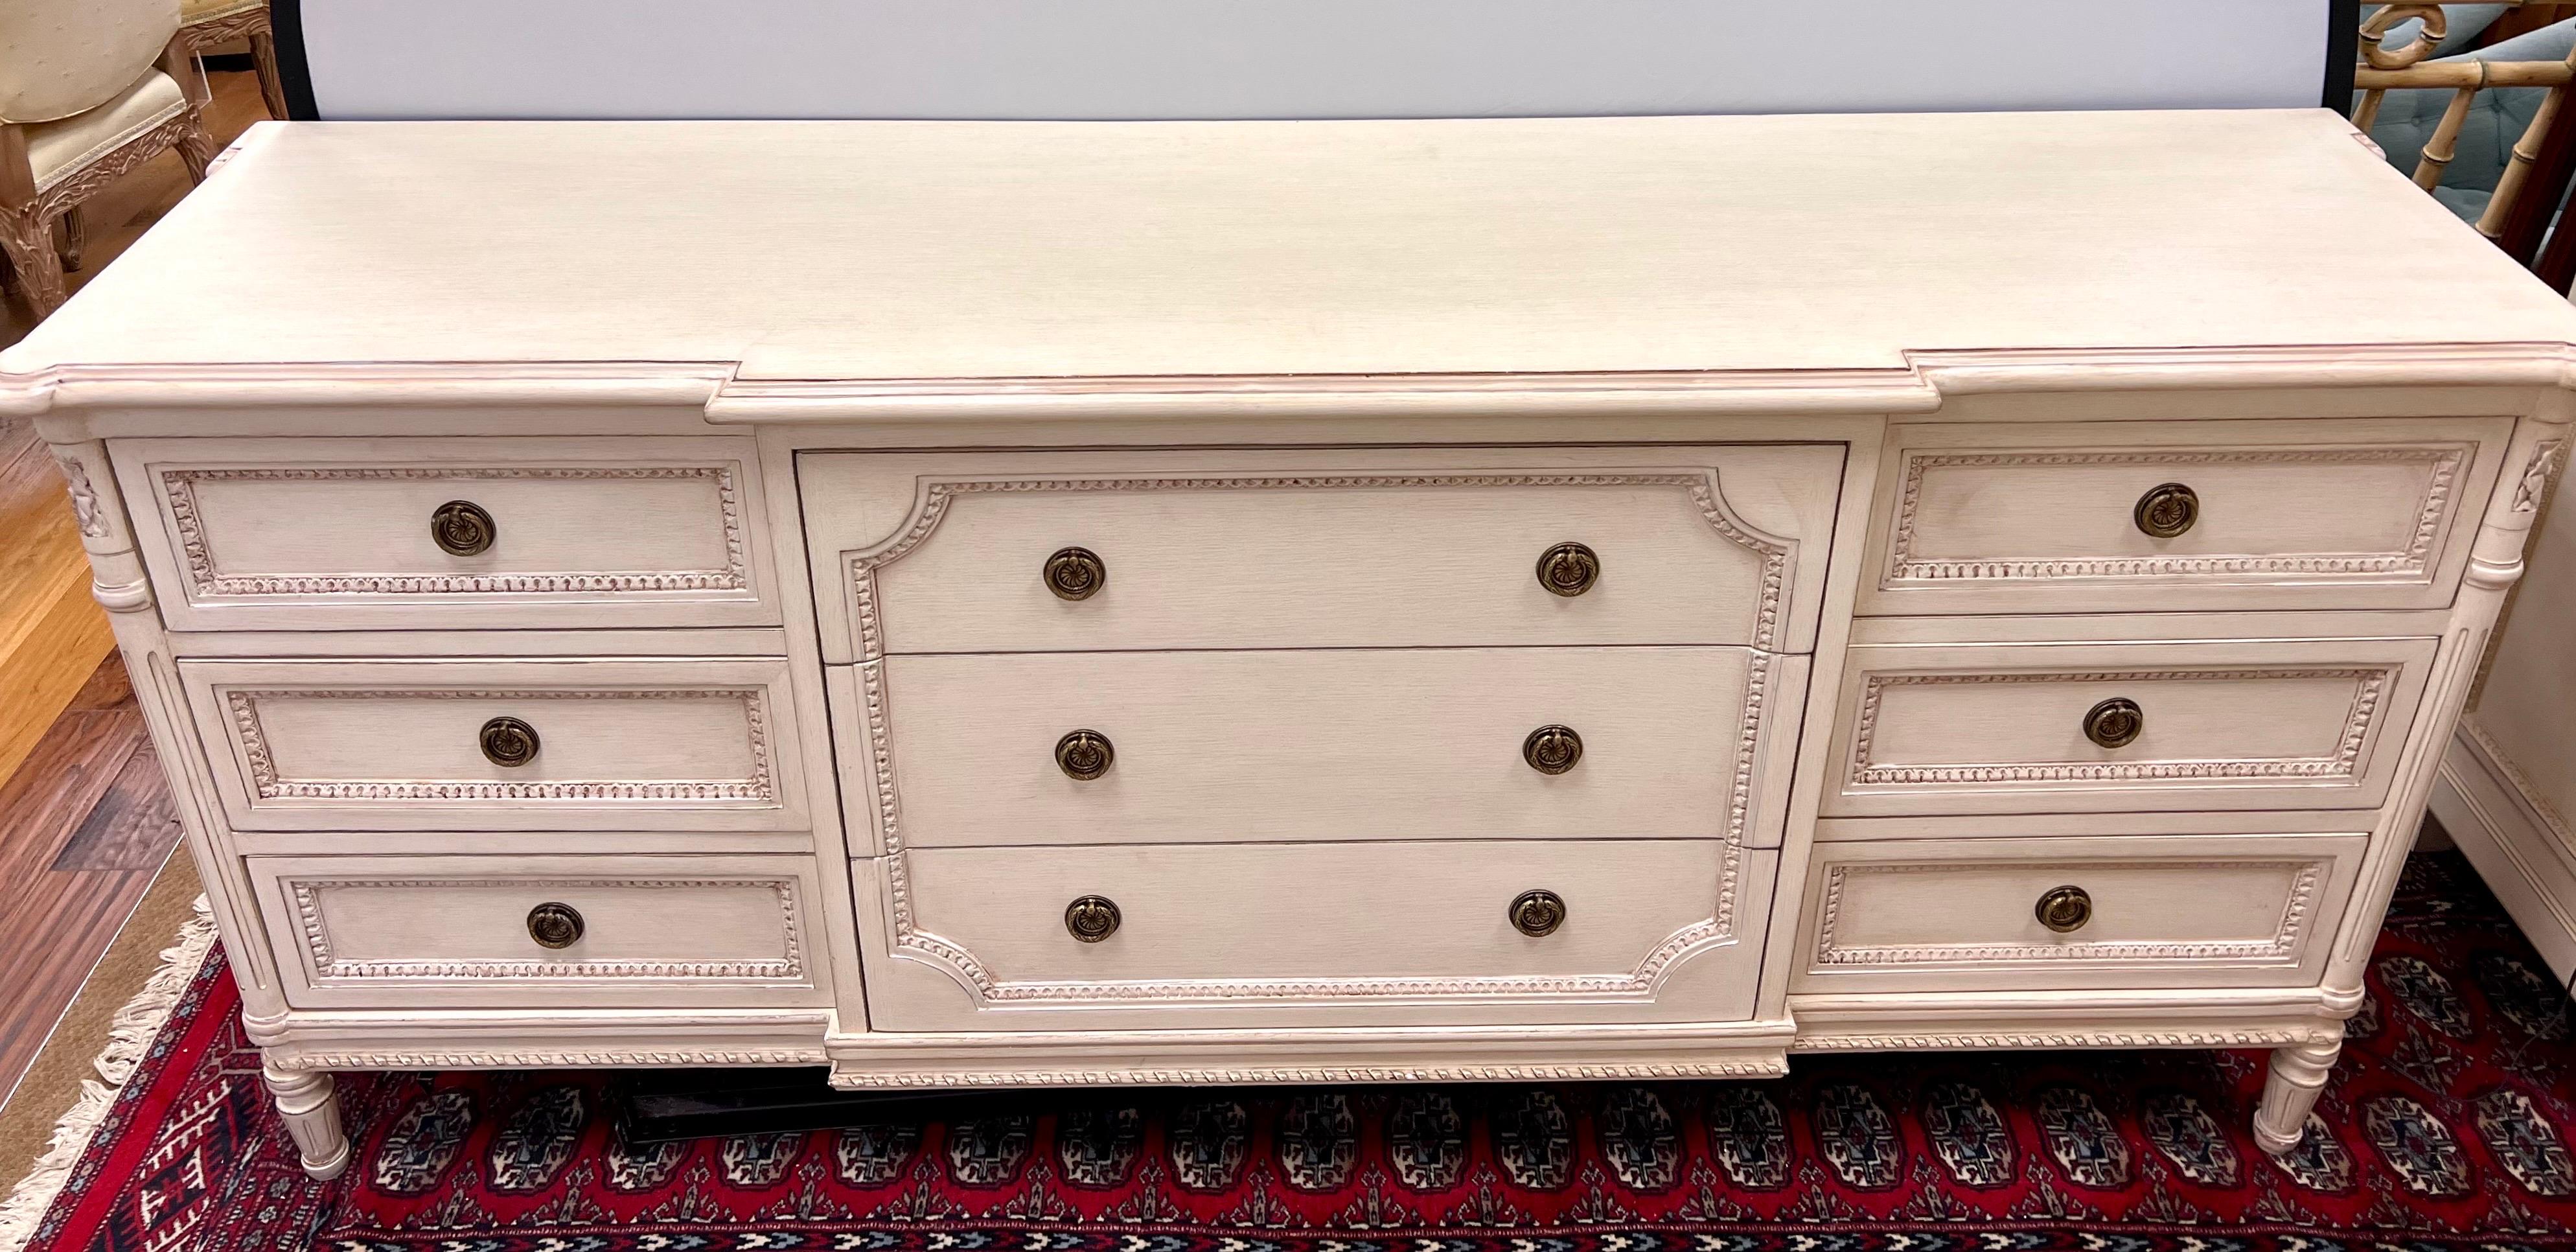 French style dresser by Louis J. Solomon is meticulously crafted with intricate carved details and a beautiful distressed cream finish. Part of a larger set and note we are selling each piece individually. With nine drawers, it offer functionality